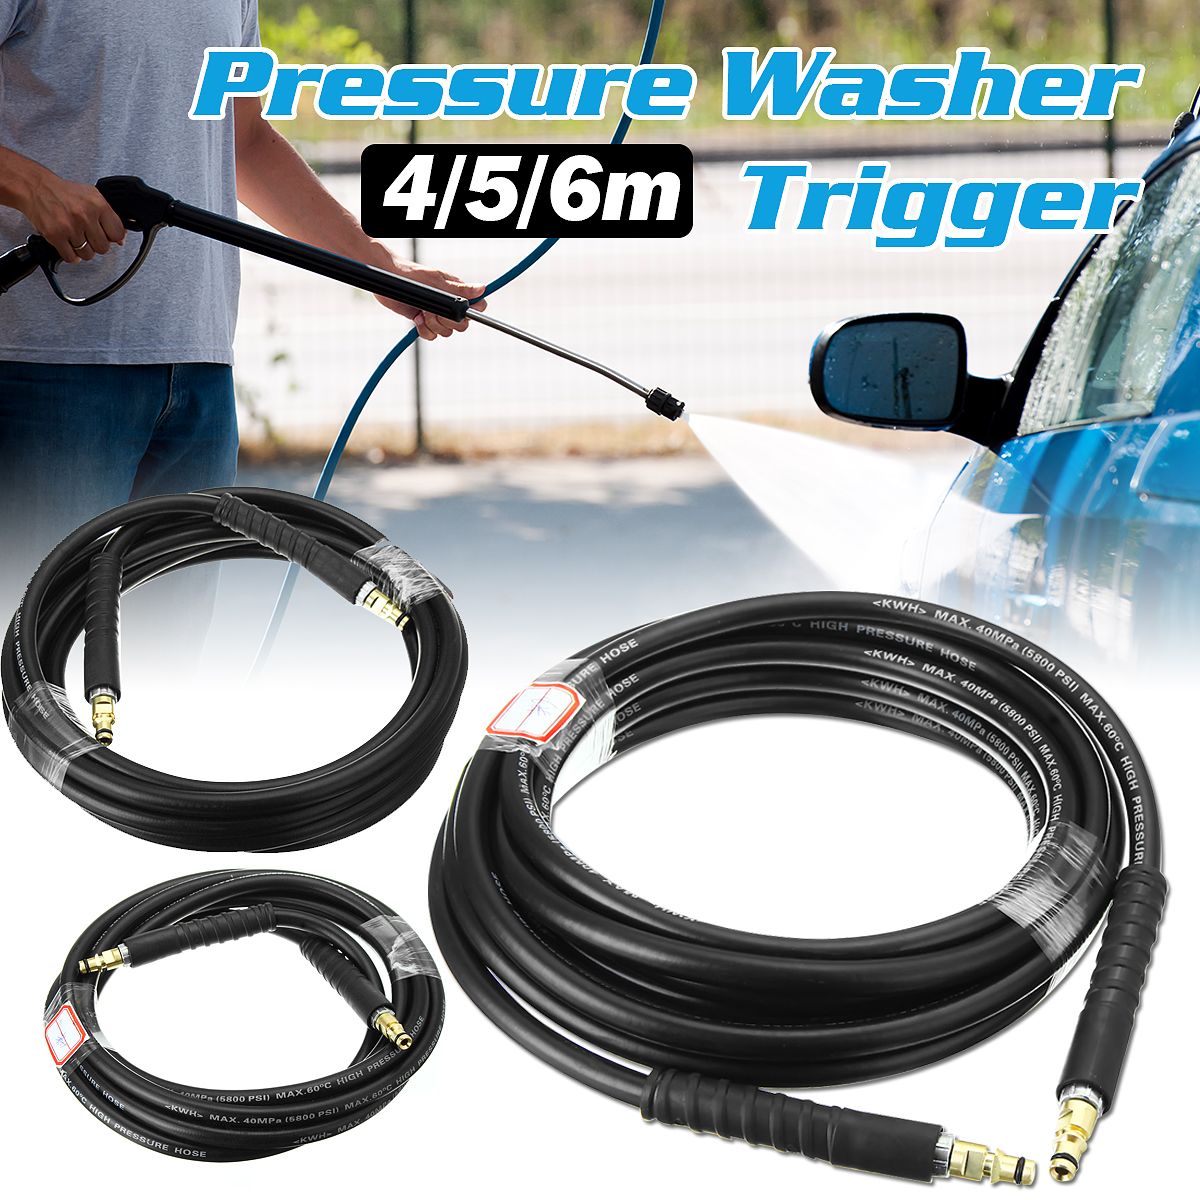 456m-Pressure-Washer-Hose-For-KARCHER-K-Series-Quick-Fit-Click-Yellow-Trigger-NSNS-TR-1375683